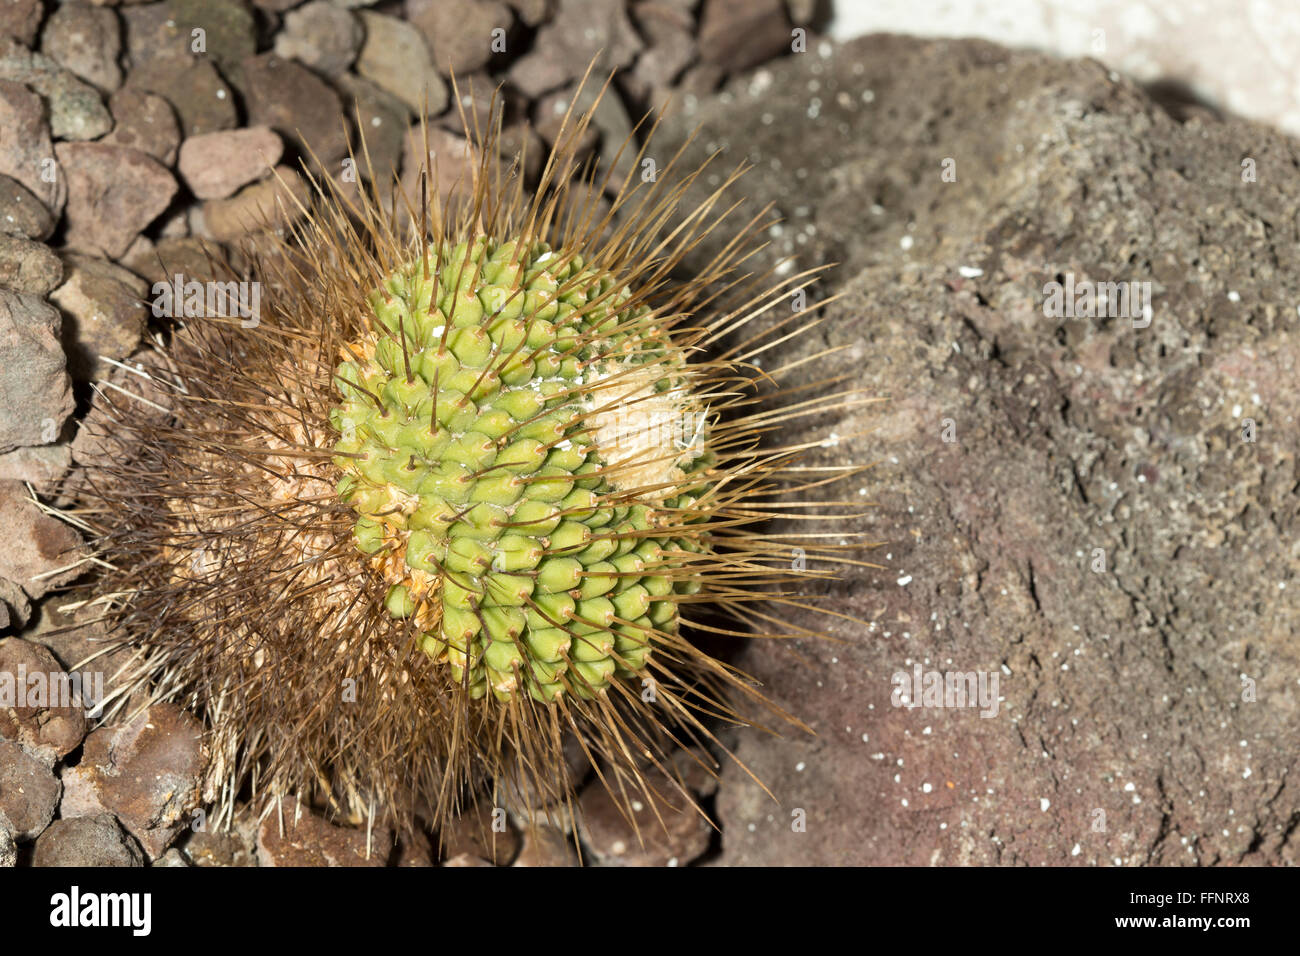 A spiked cactus with very long spines Stock Photo